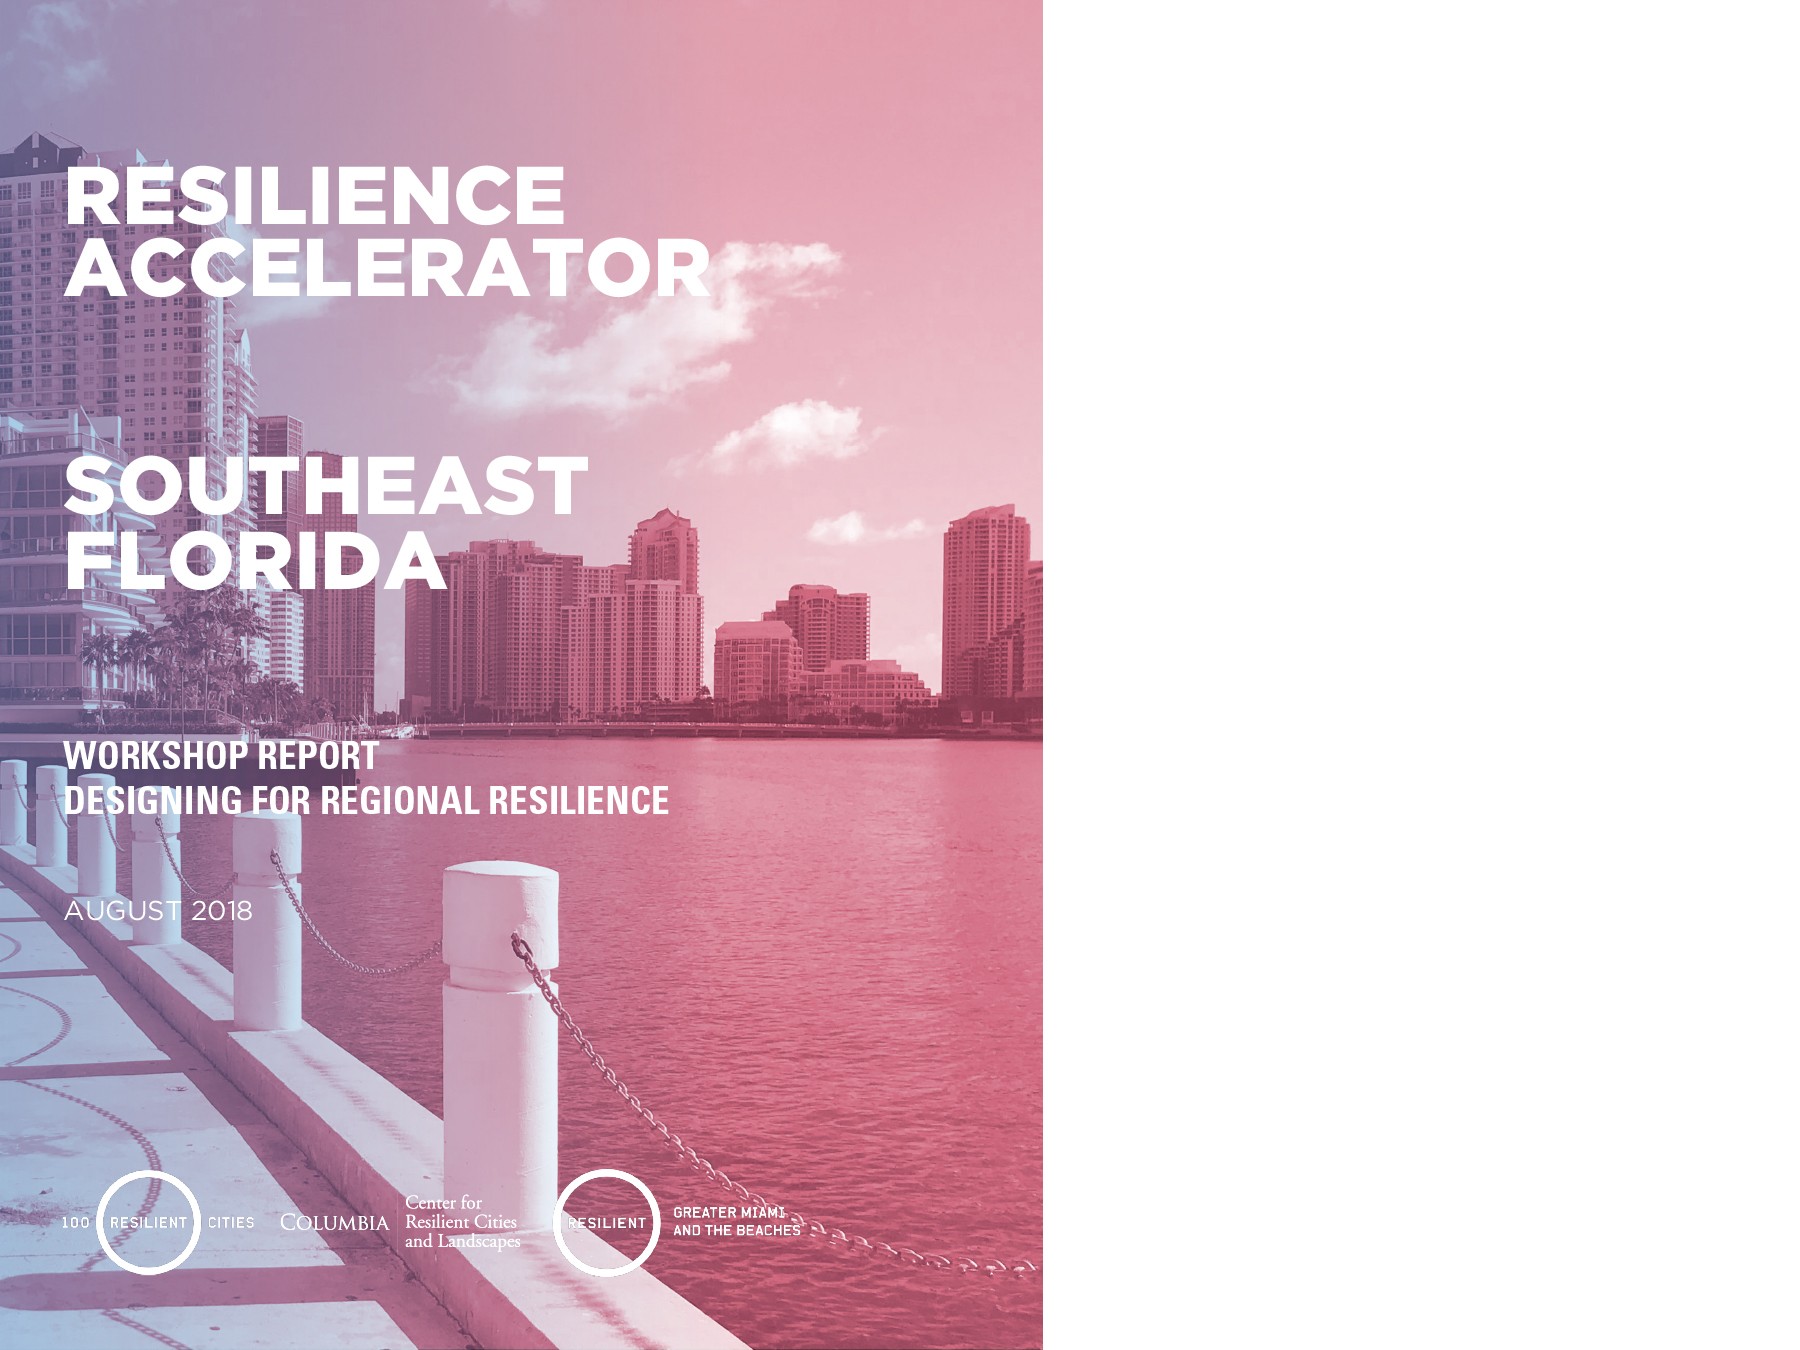 Southeast Florida Resilience Accelerator Workshop Report